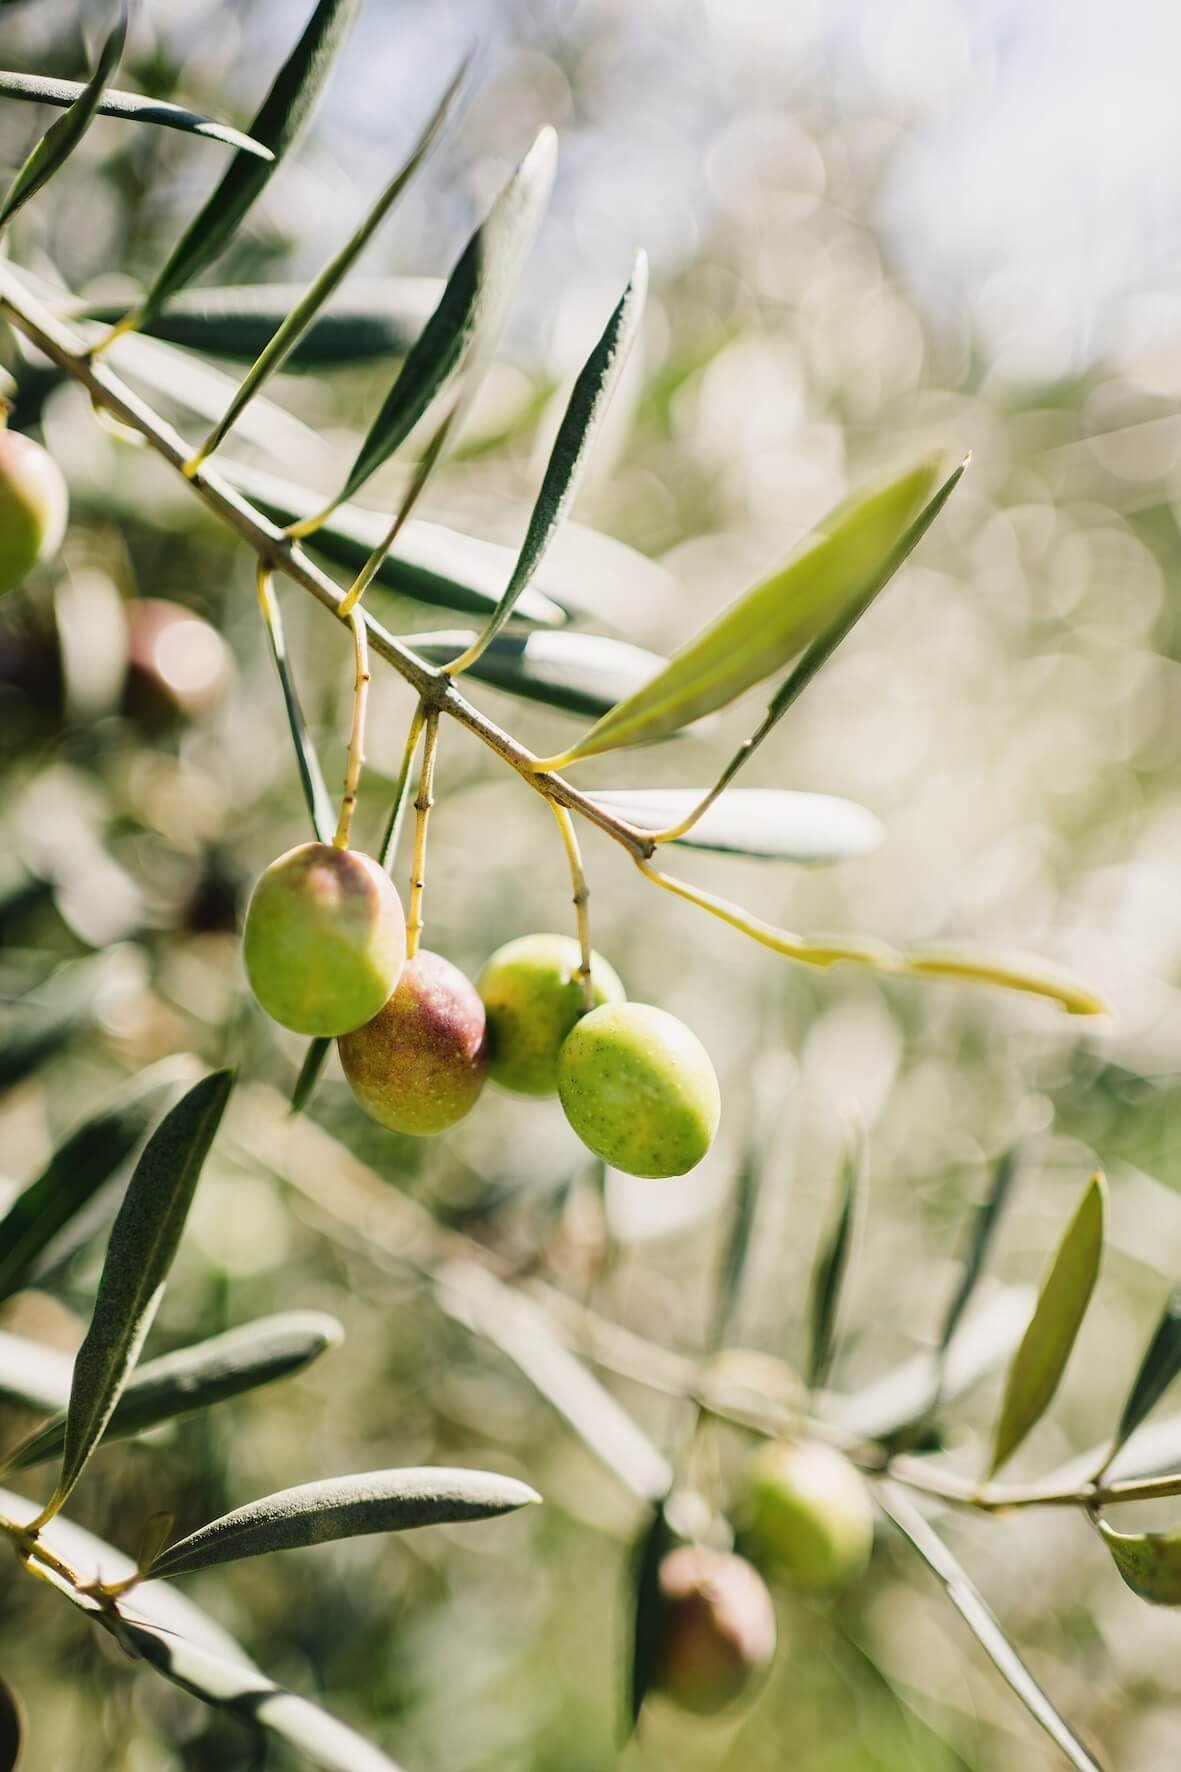 passeite farm, portugal, olives on branch